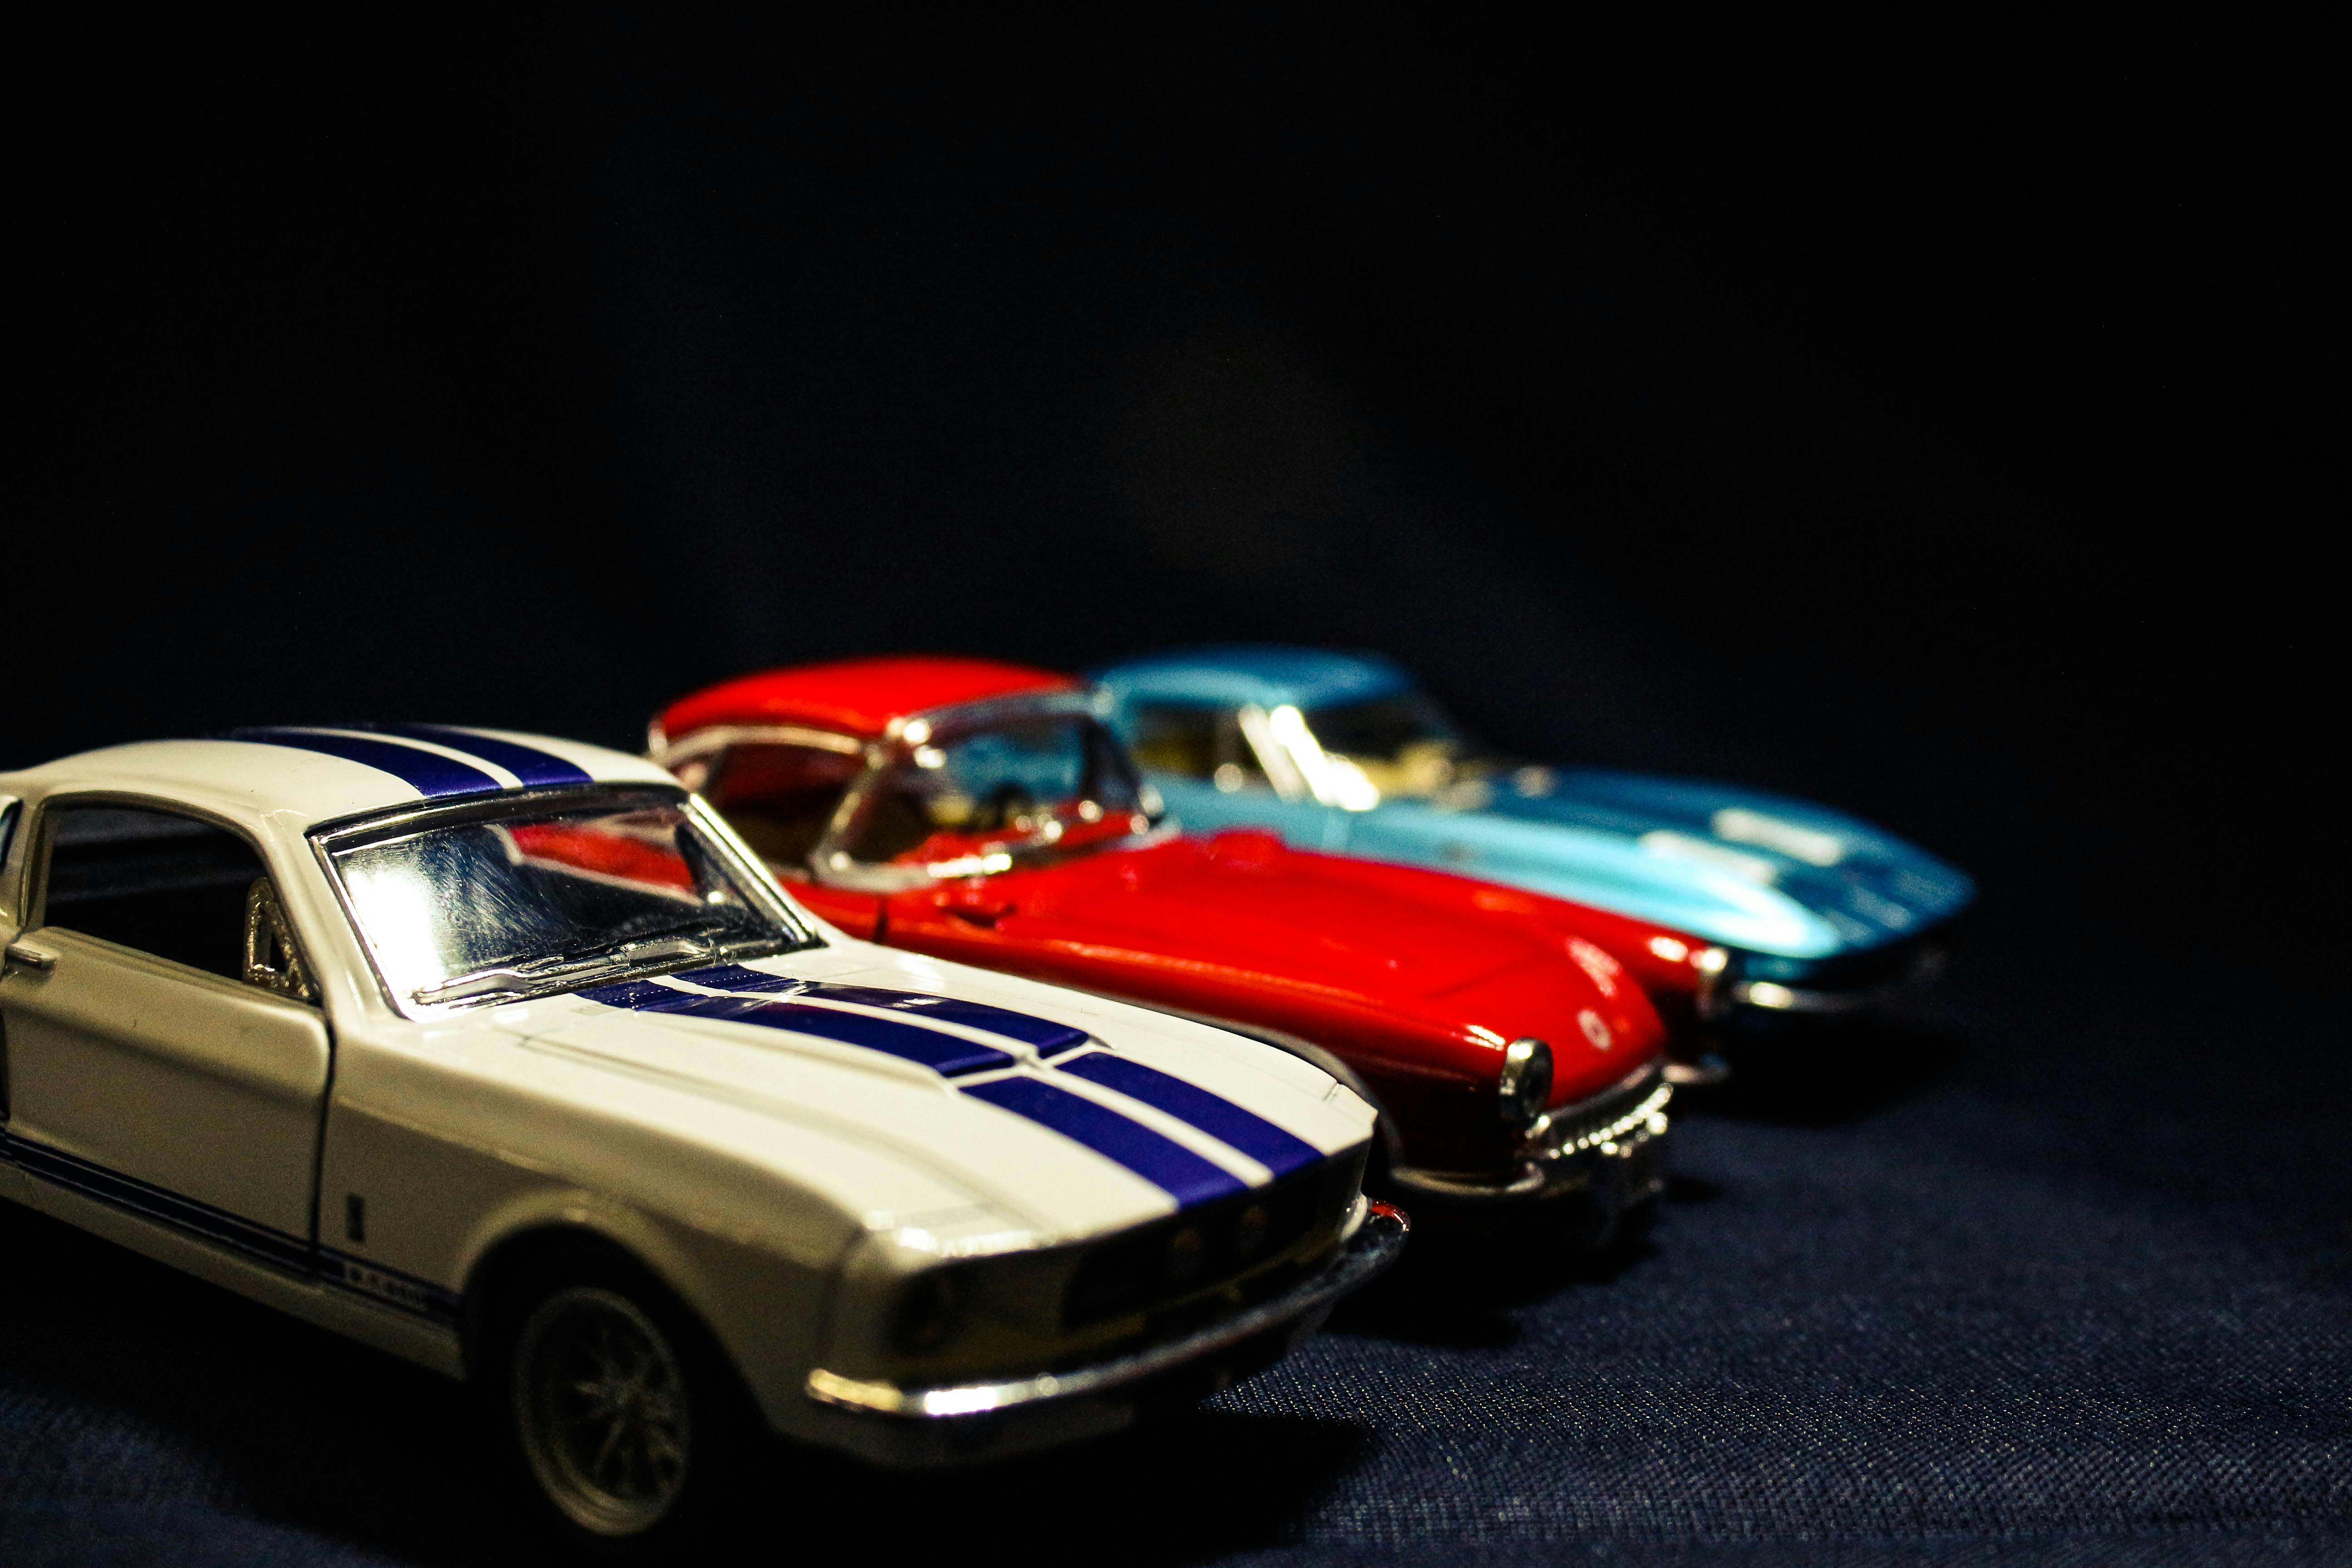 Free stock photo of cars, miniature toy, toy cars